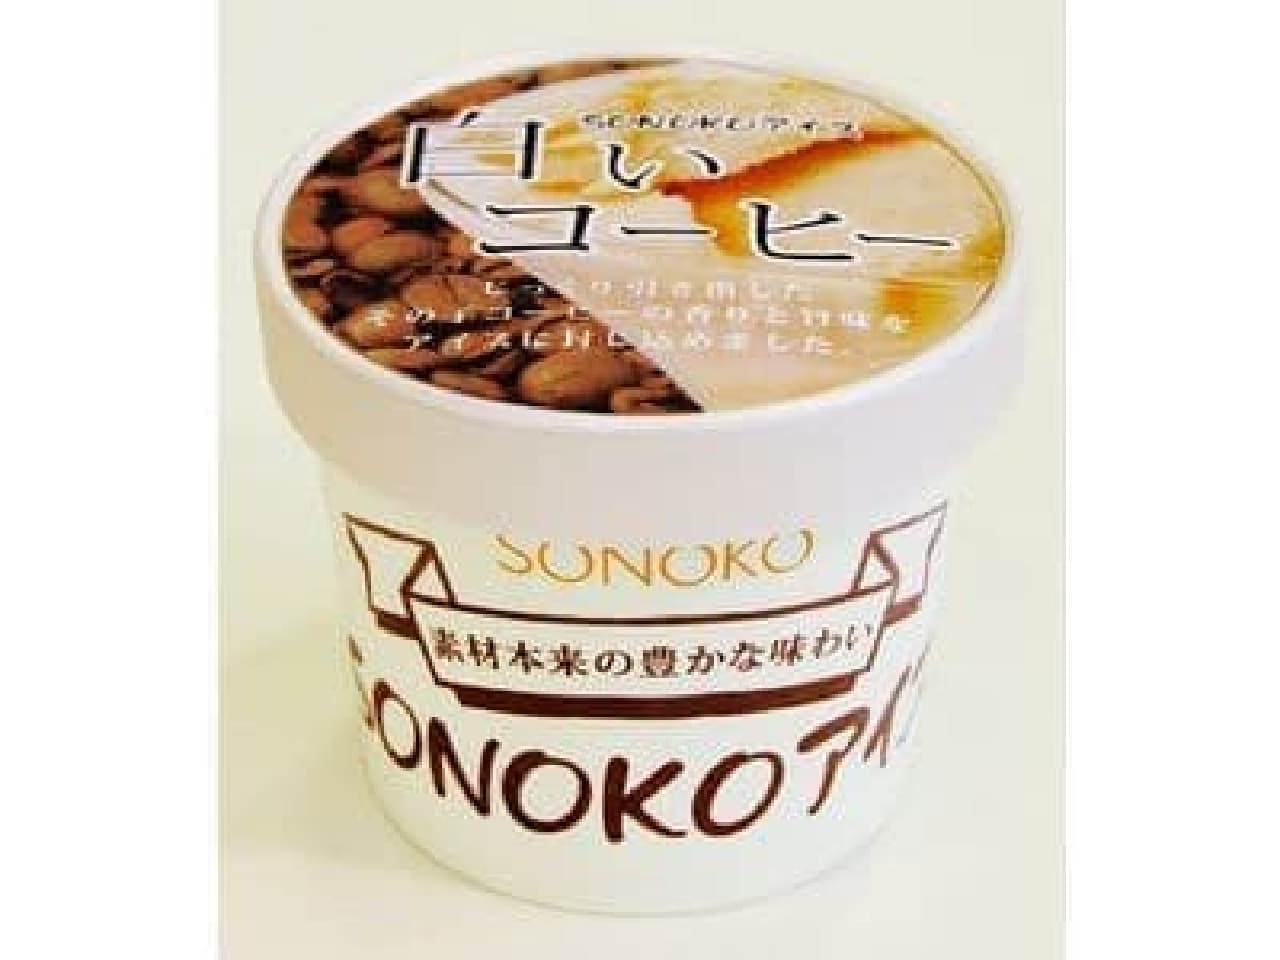 How about white coffee ice cream filled with the idea of "queen of whitening"?